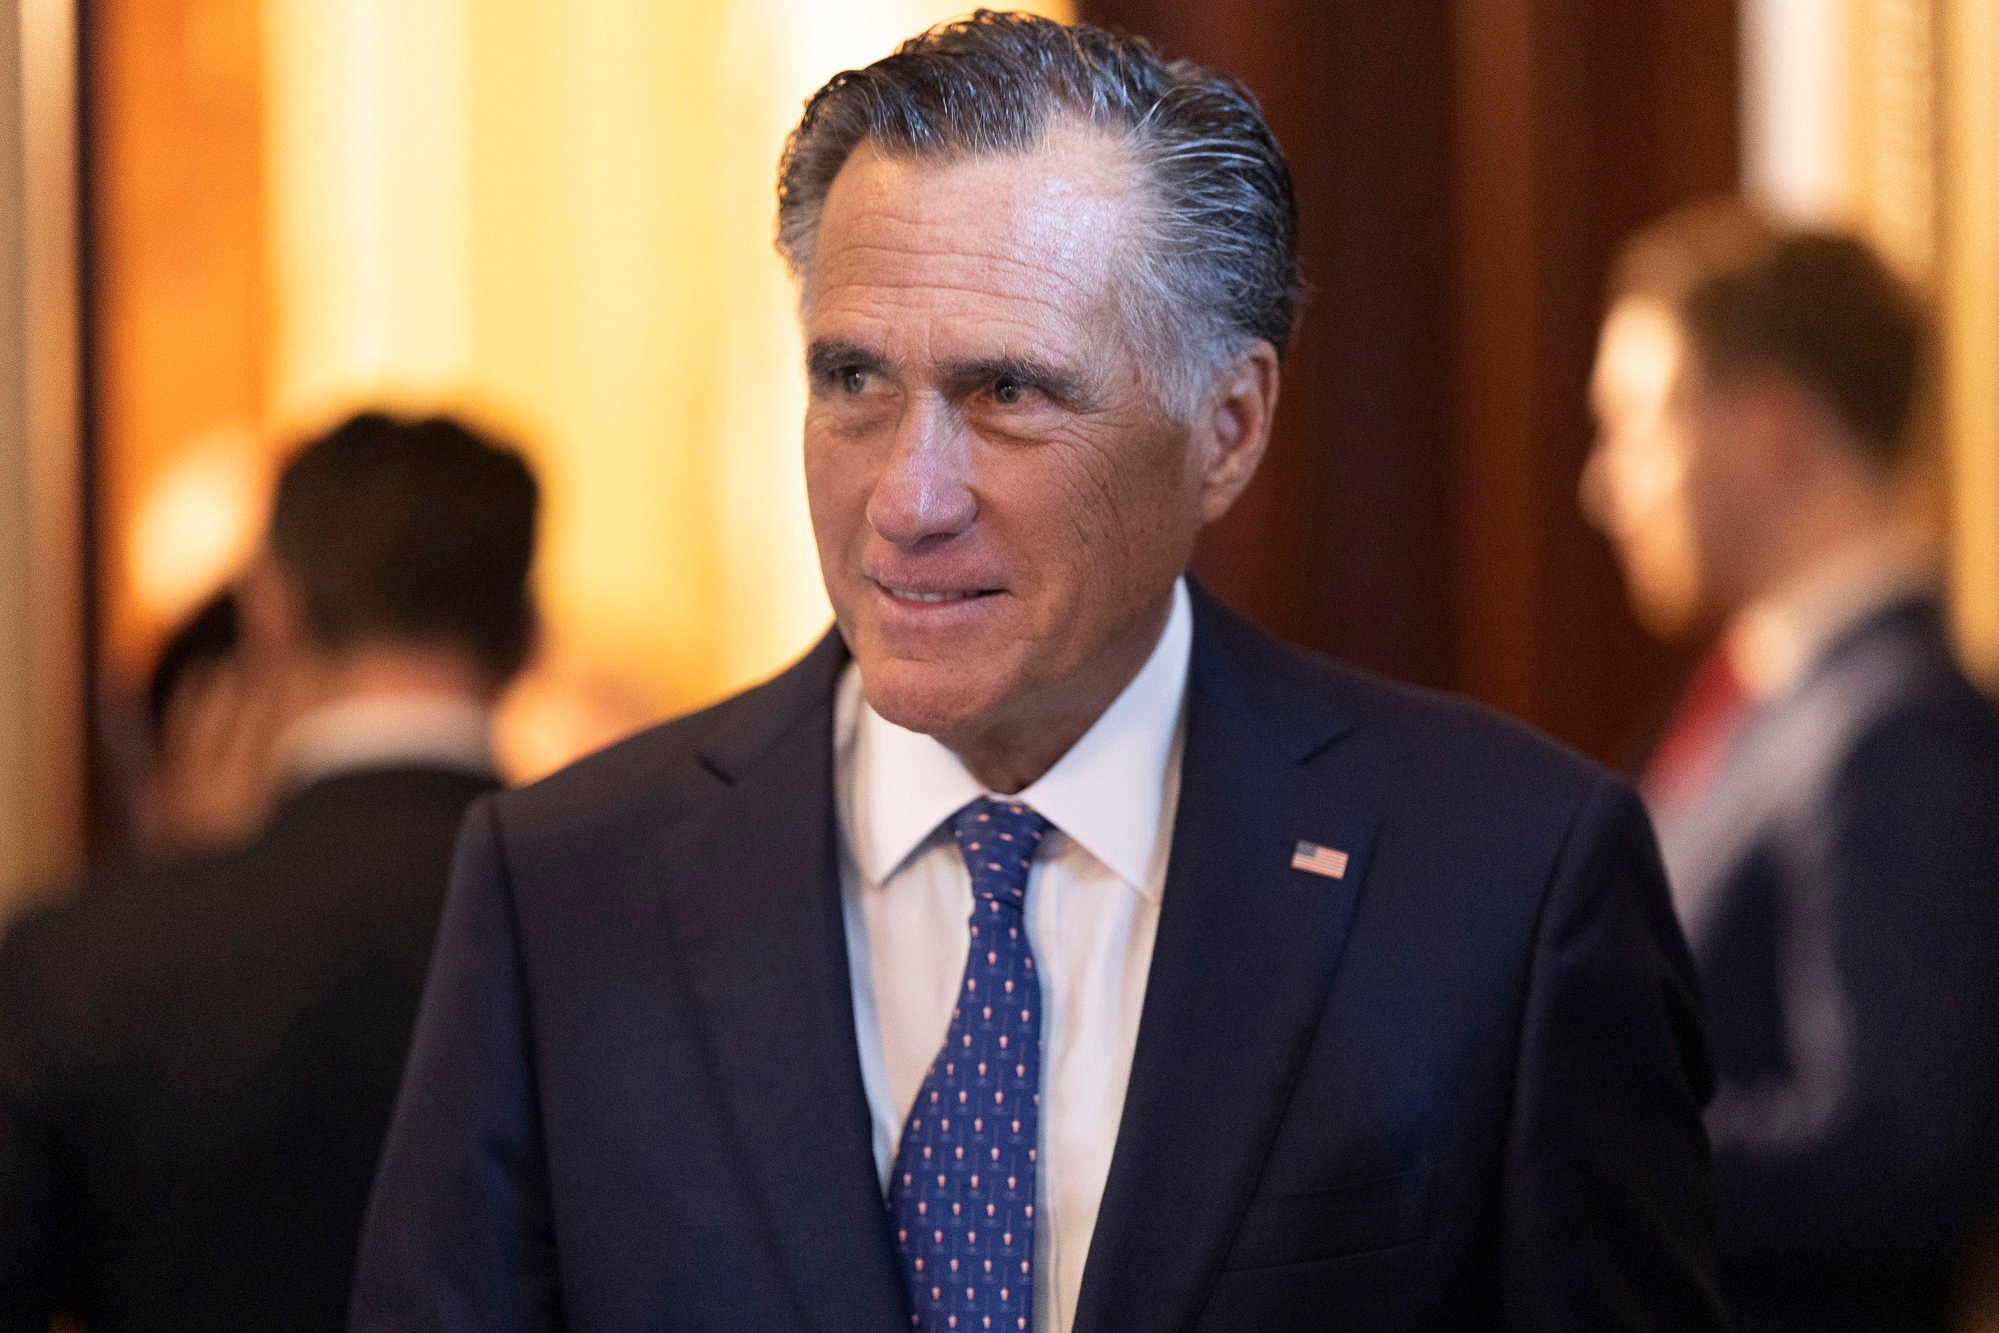 US senator Mitt Romney, a Utah Republican, has criticised the Biden administration’s China policy. Photo: Getty Images/TNS